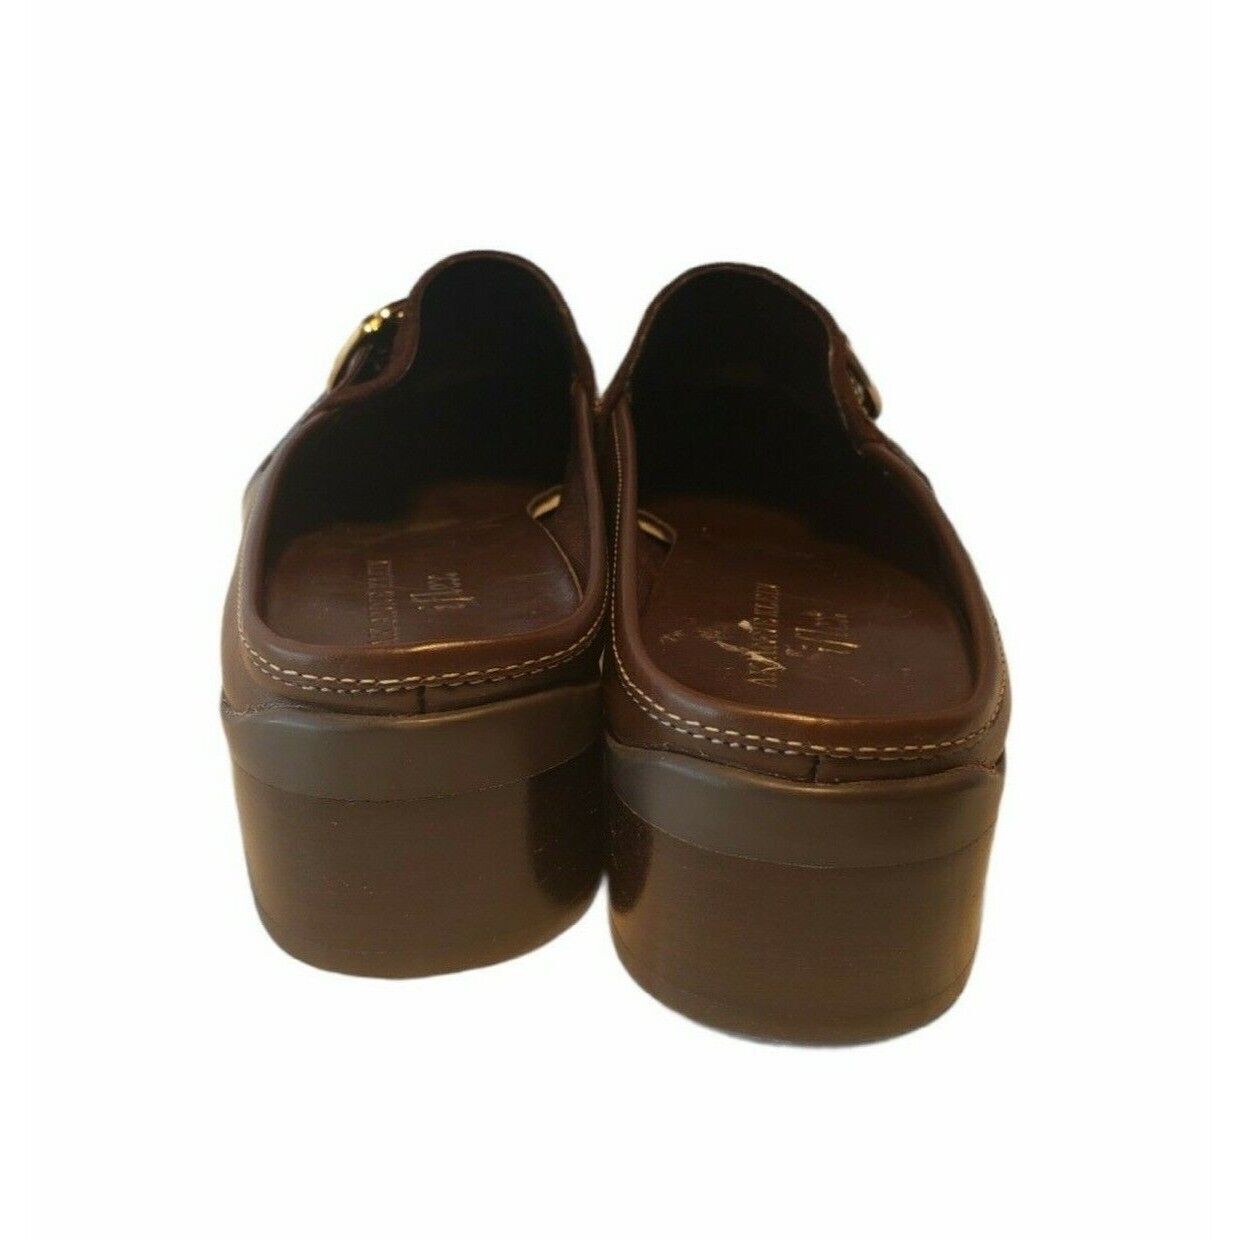 AK ANNE KLEIN iflex Brown Leather Side Mules Clogs Shoes Womens Size 7 M - Opticdeals